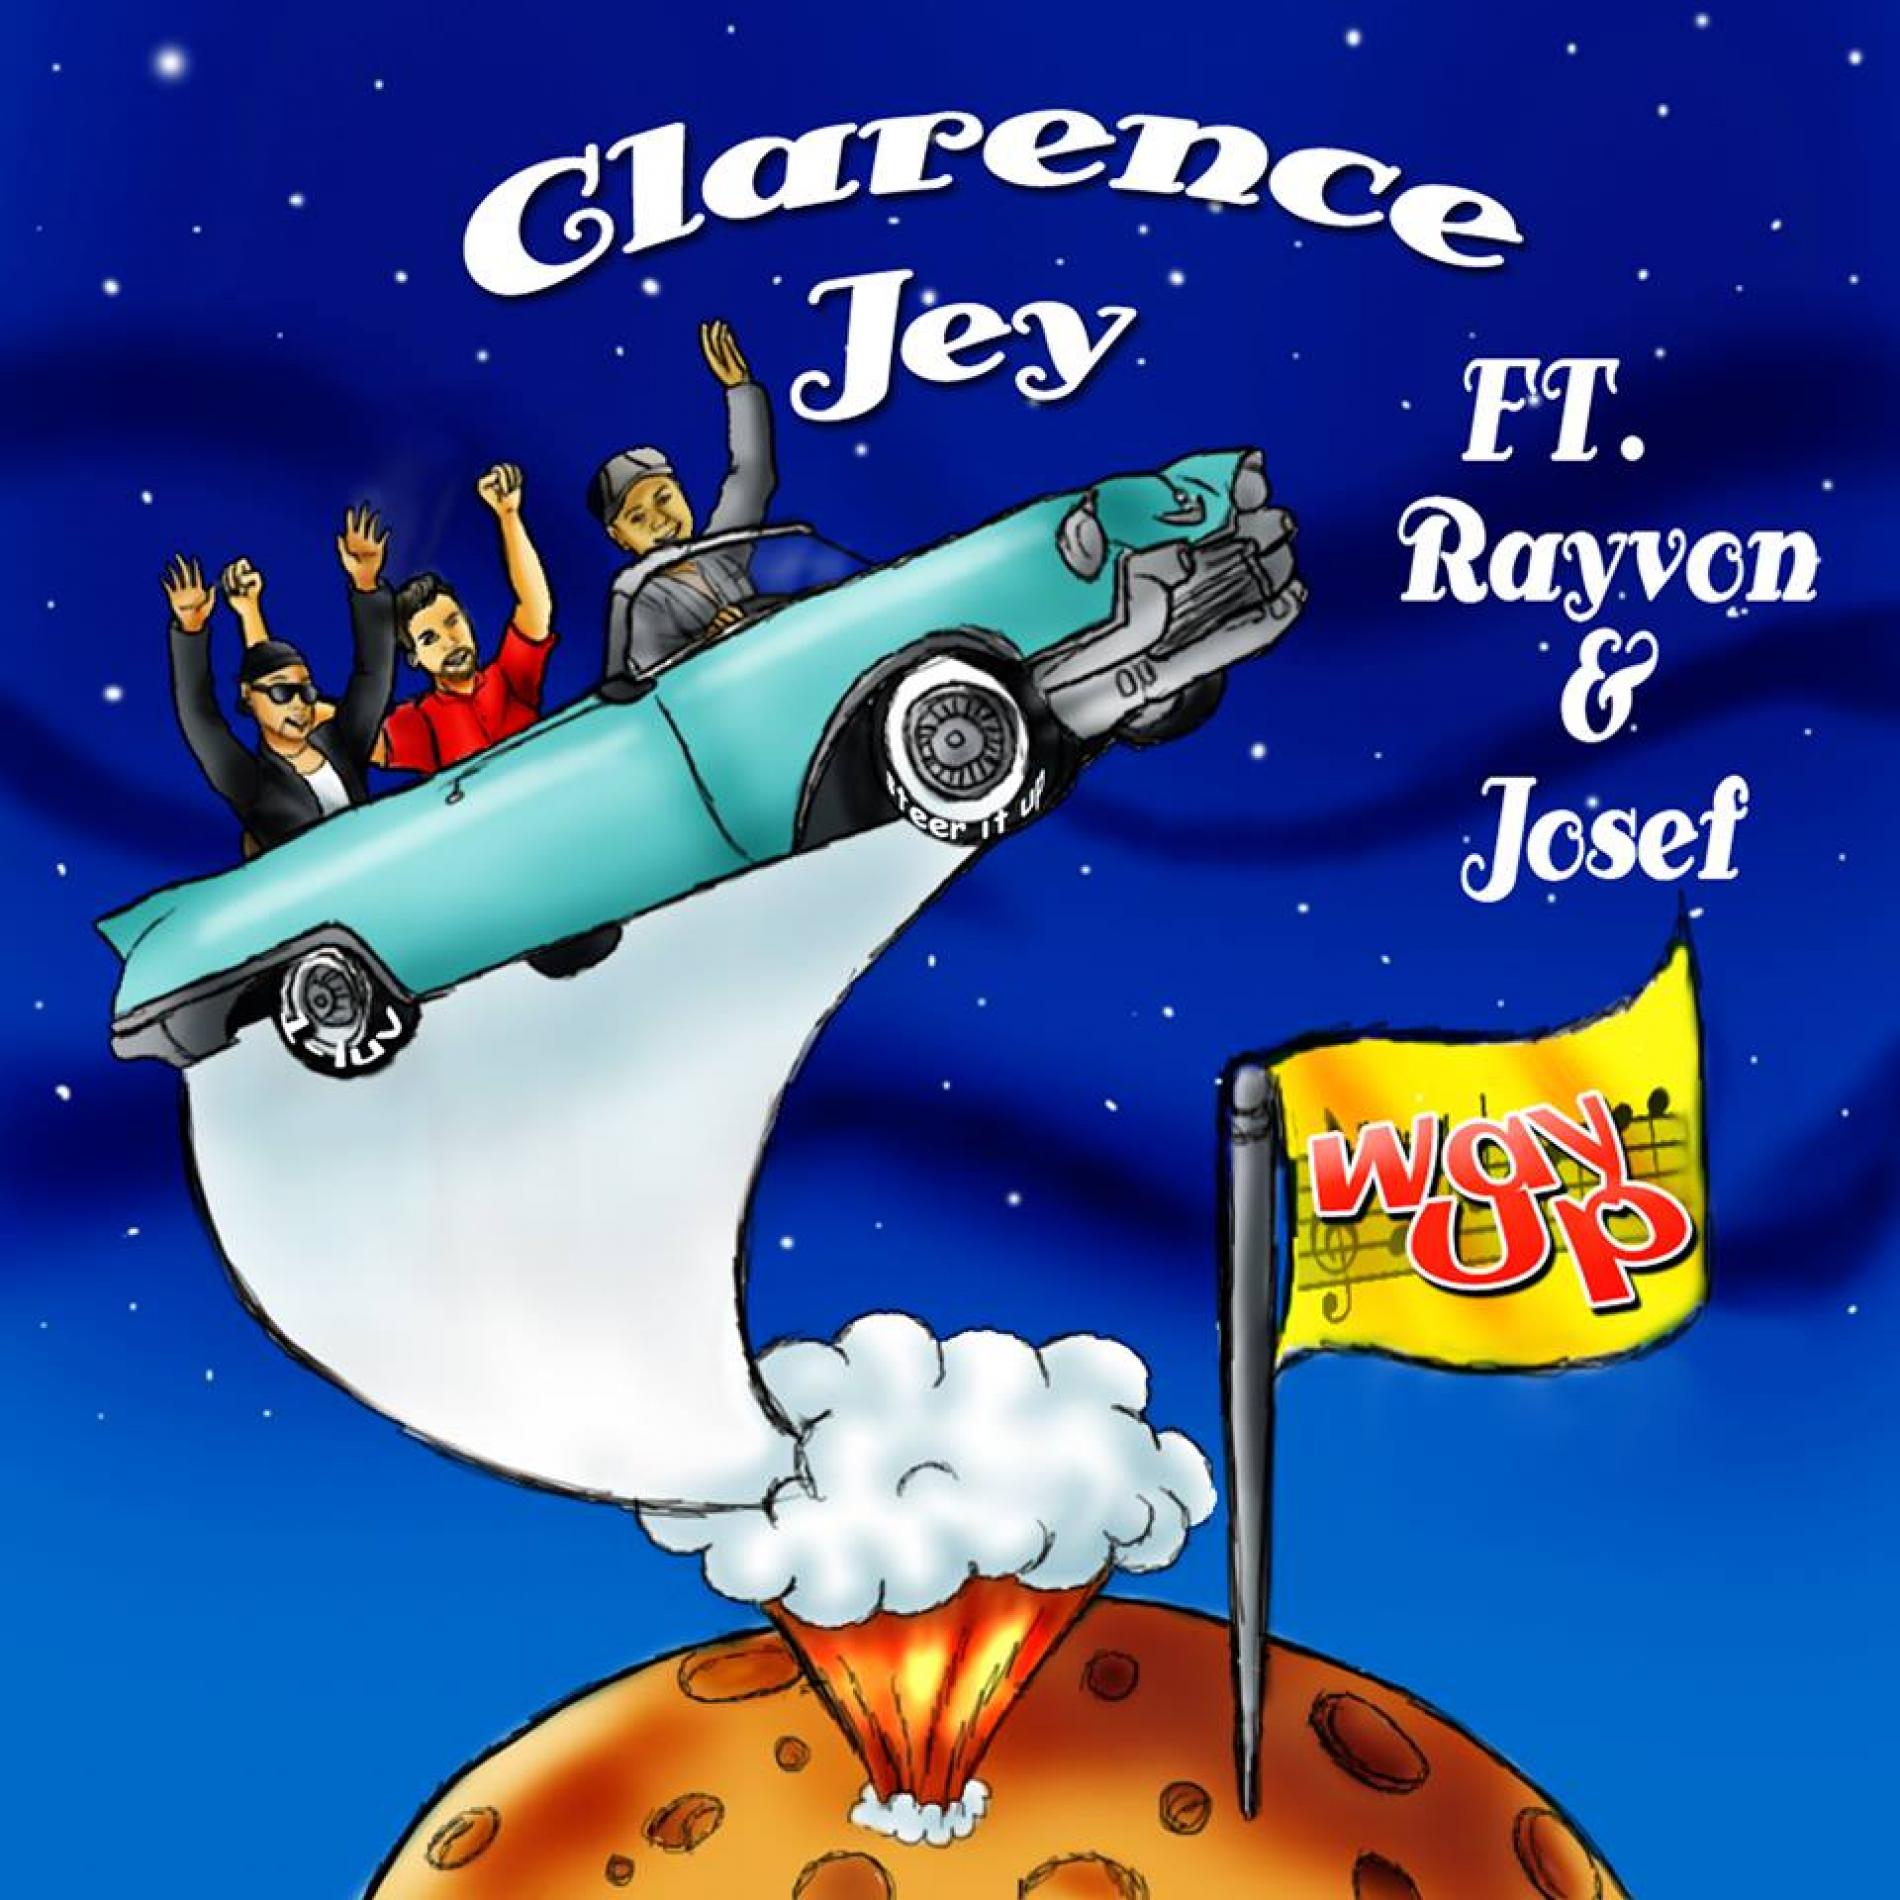 Clarence Jey To Premiere “Way Up” On YES101